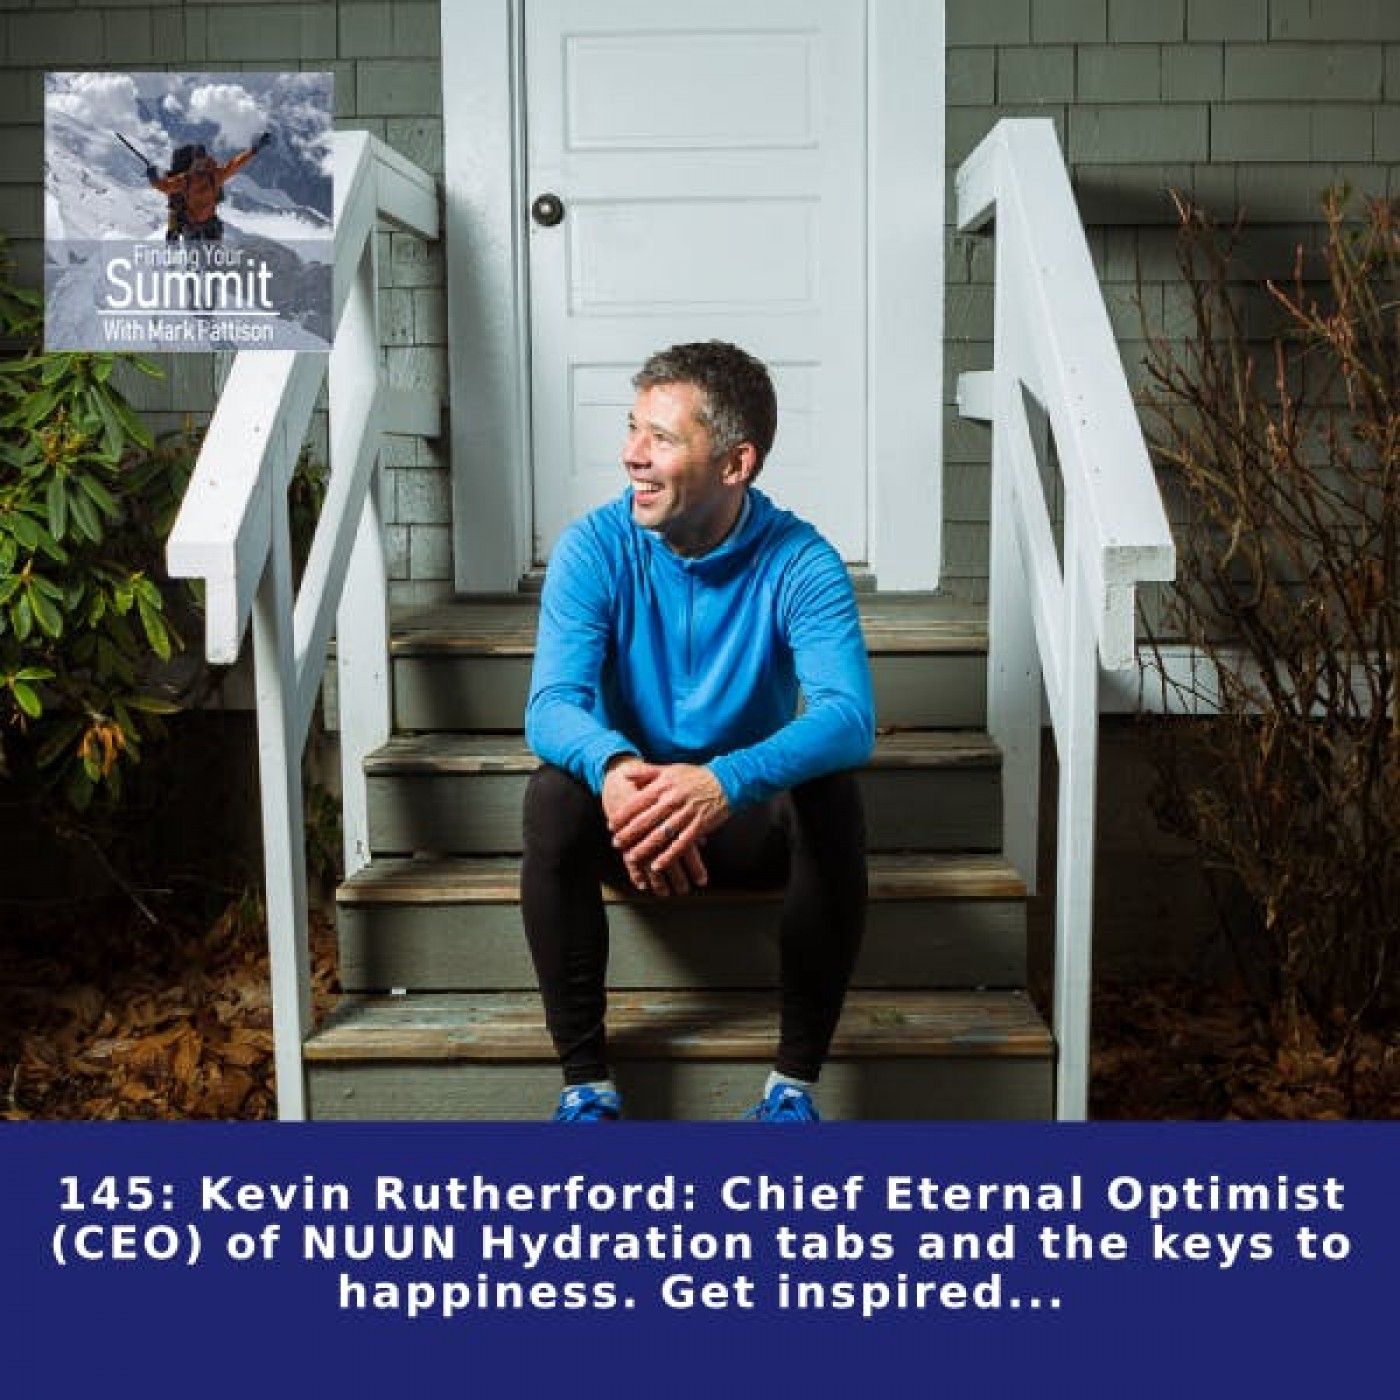 Kevin Rutherford: Chief Eternal Optimist (CEO) of NUUN Hydration tabs and the keys to happiness. Get inspired...